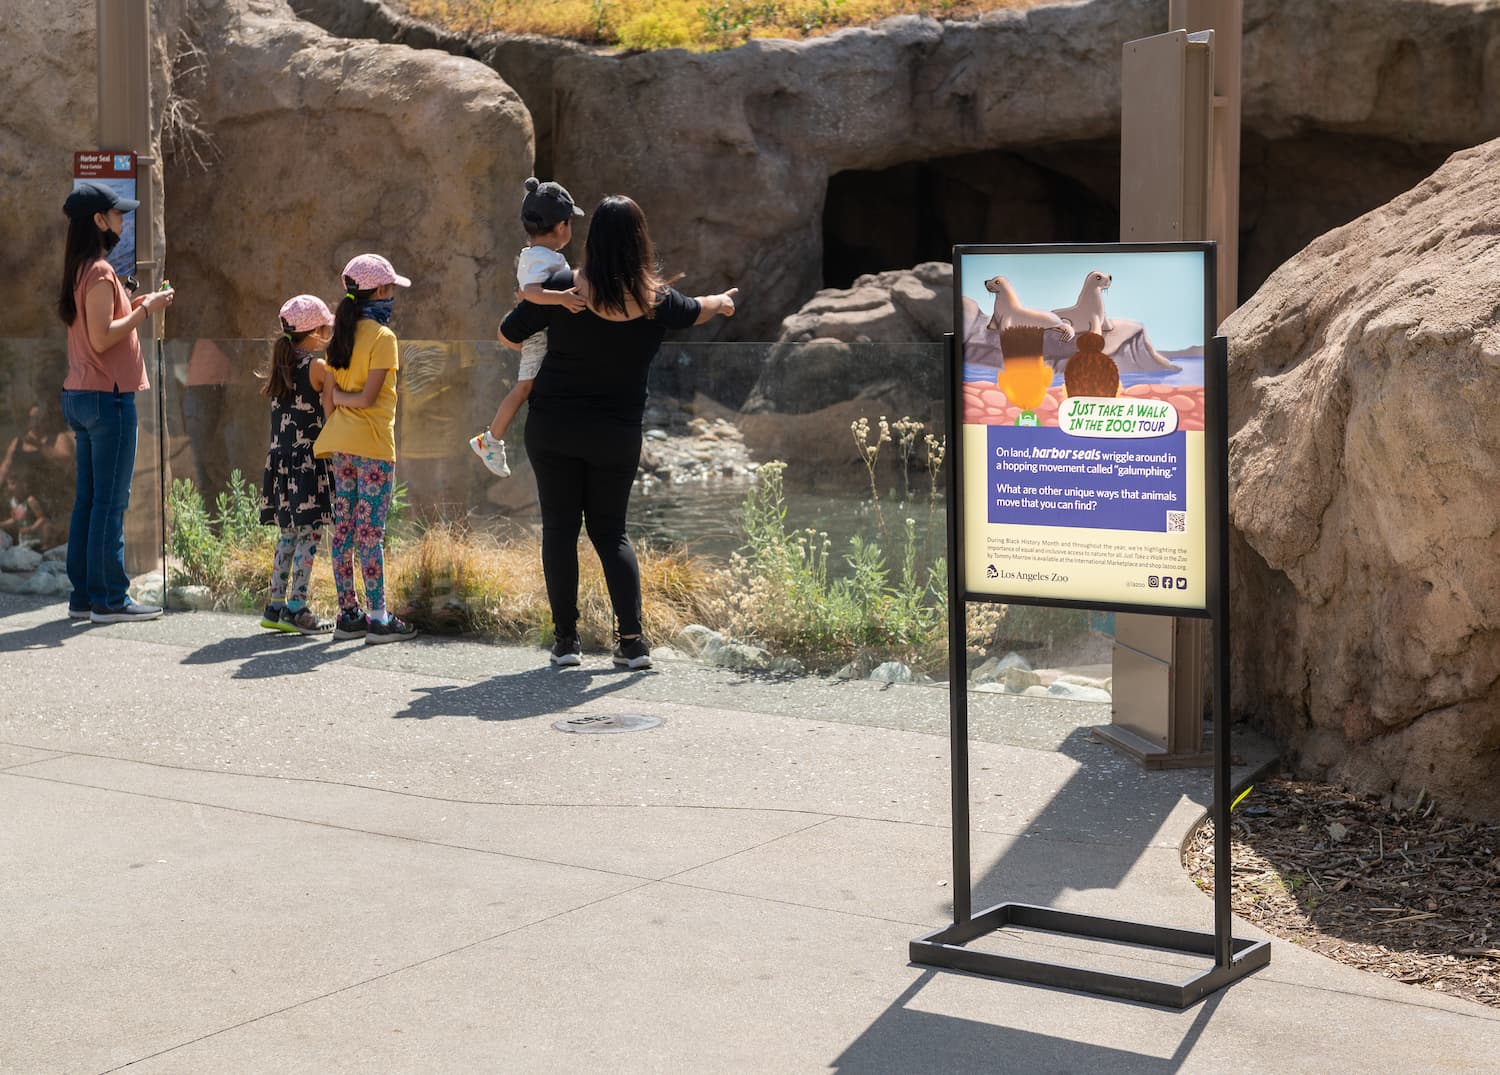 Guests take in views of the Sea Life Cliffs habitat, where a sign inspired by the children's book "Just Take a Walk in the Zoo" is displayed. The sign features an illustration from the book depicting two African American children exploring a zoo. The copy reads, "On land, harbor seals wriggle around in a hopping movement called 'galumphing.' What are other unique ways that animals move that you can find?"